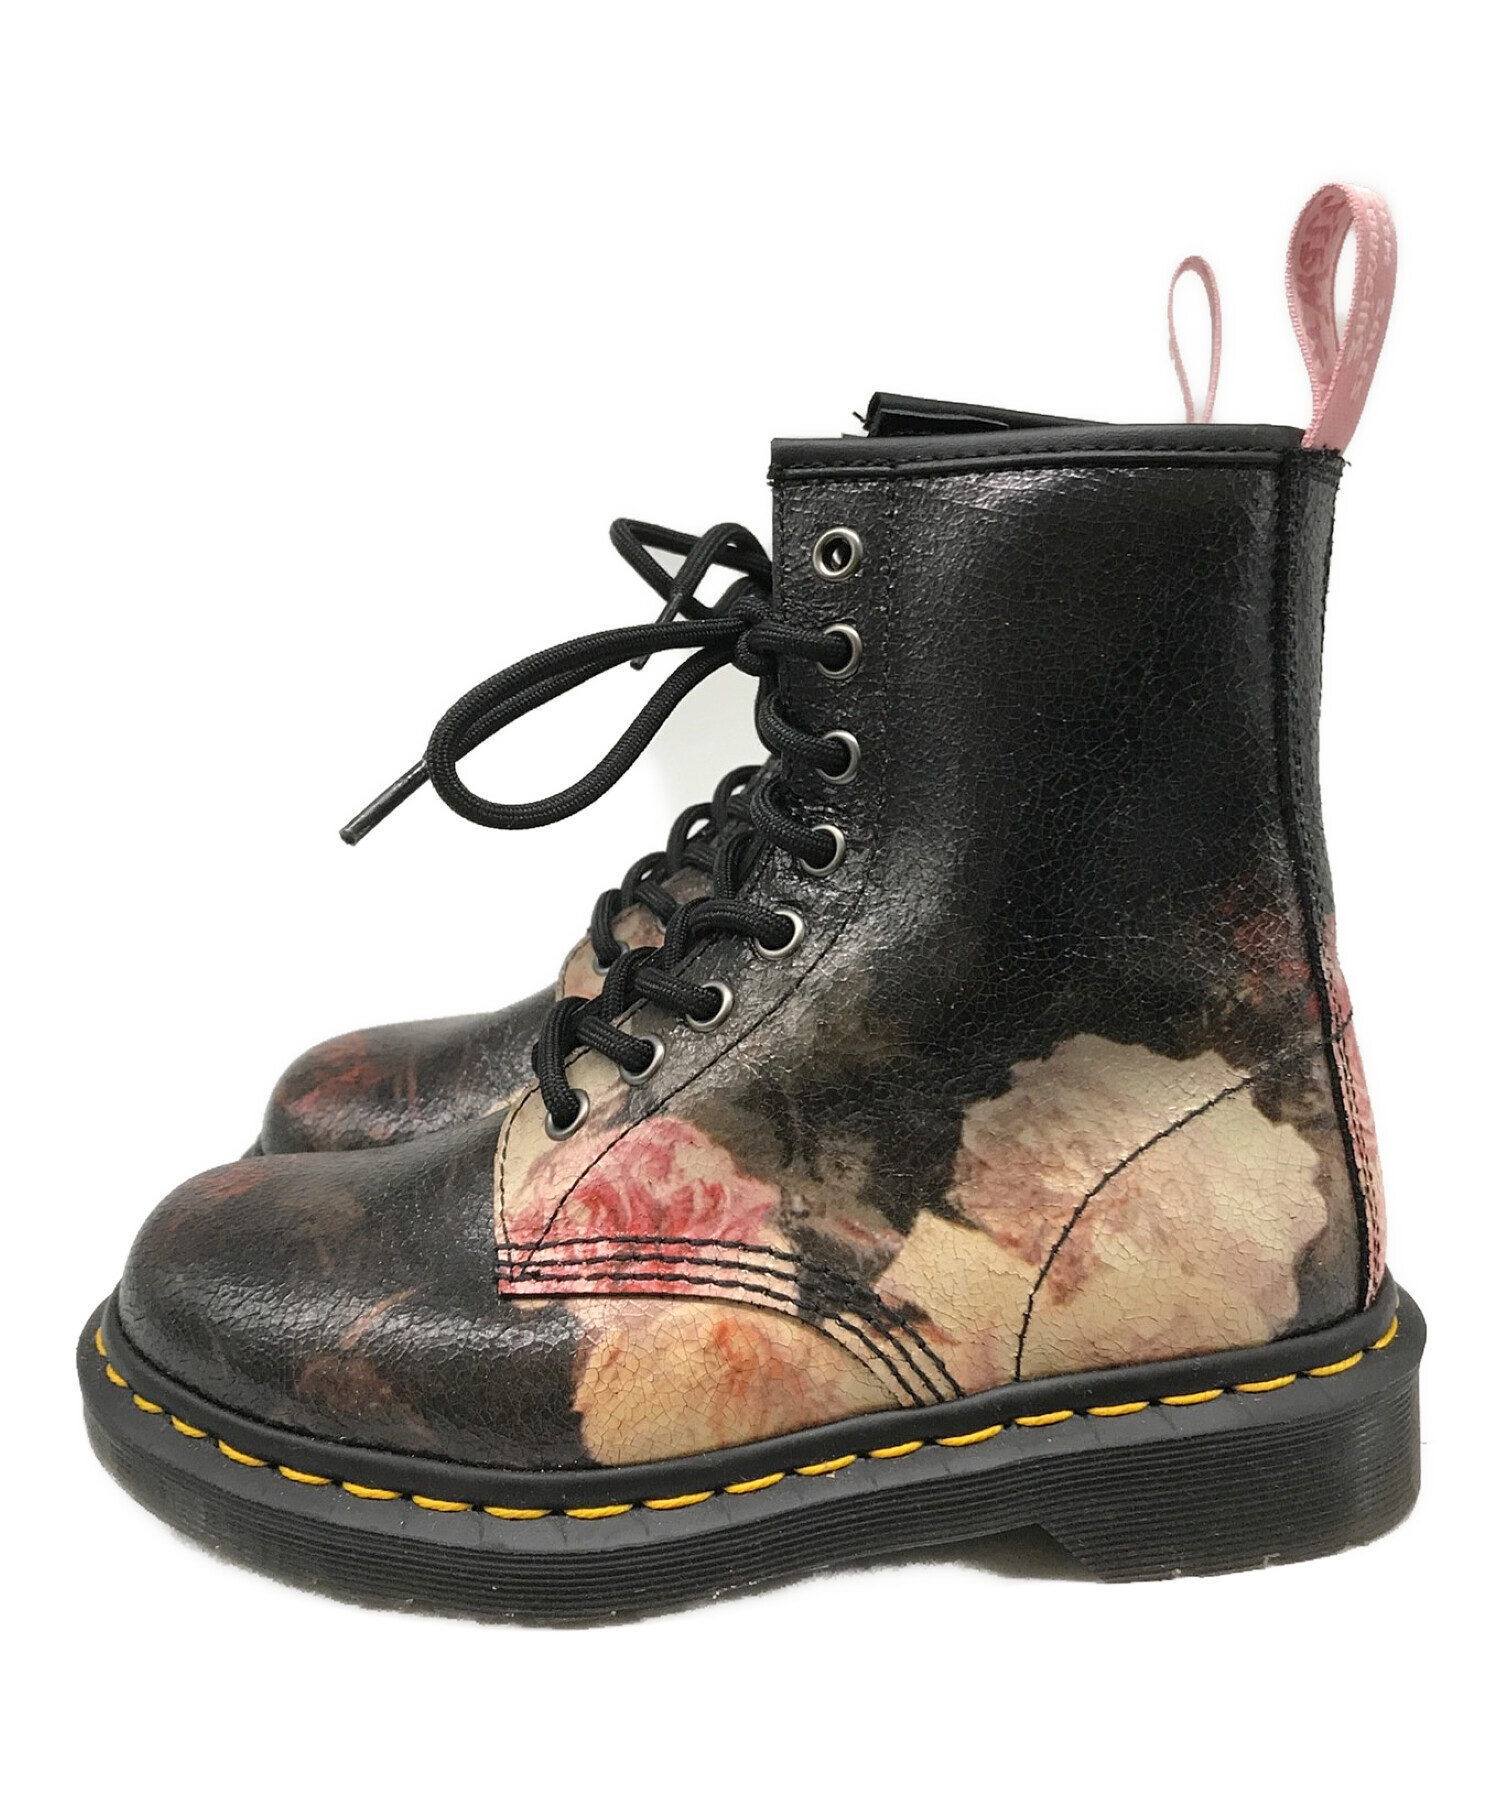 NEW特価Dr.Martens × NEW ORDER 権力の美学 8ホール ブーツ 靴